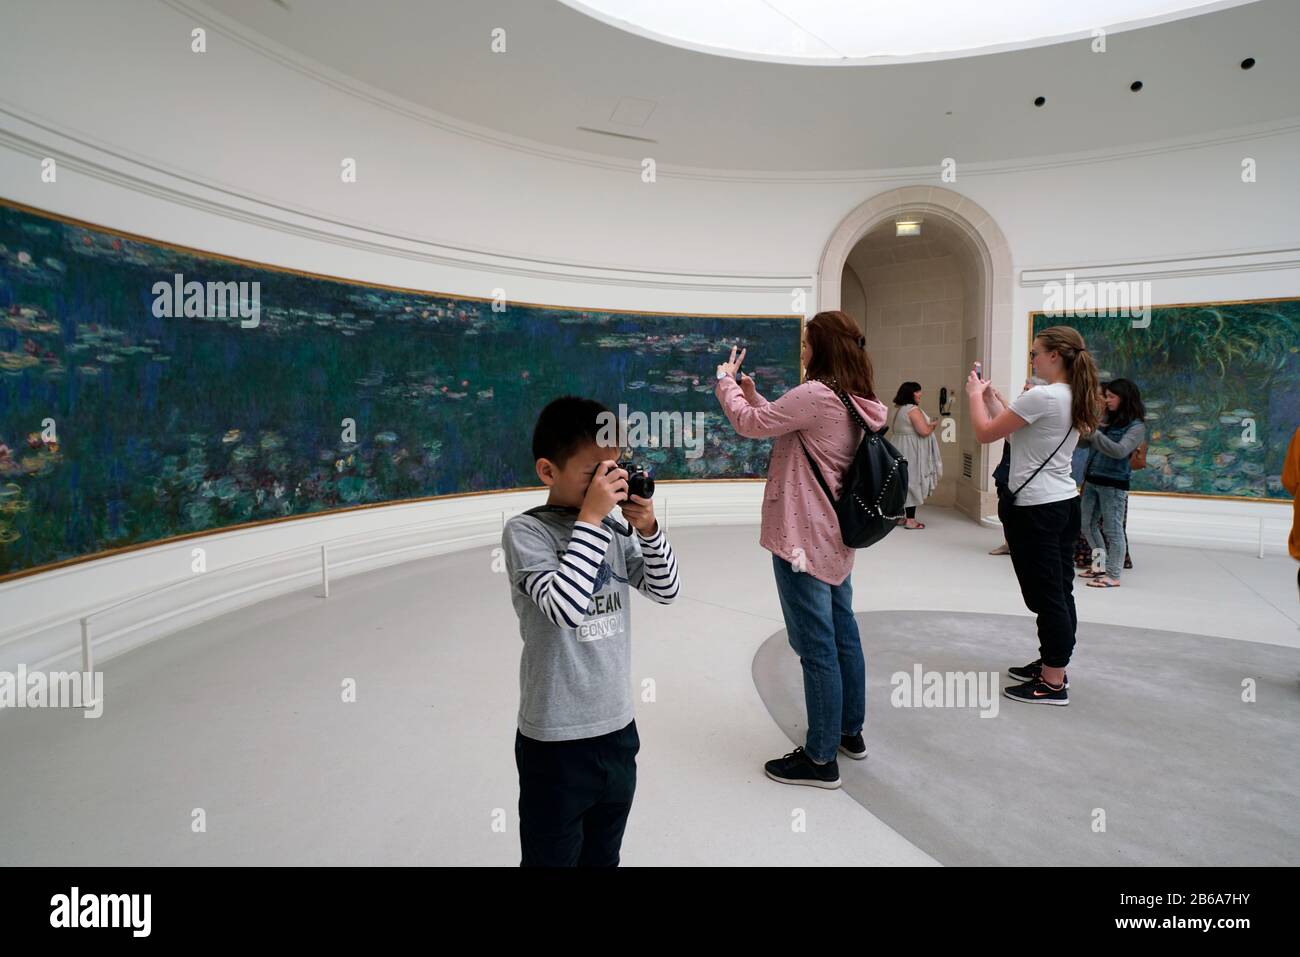 Visitors taking photos of Claude Monet's Les Nympheas Water Lilies series mural display in Musee de l'Orangerie.Paris.France Stock Photo